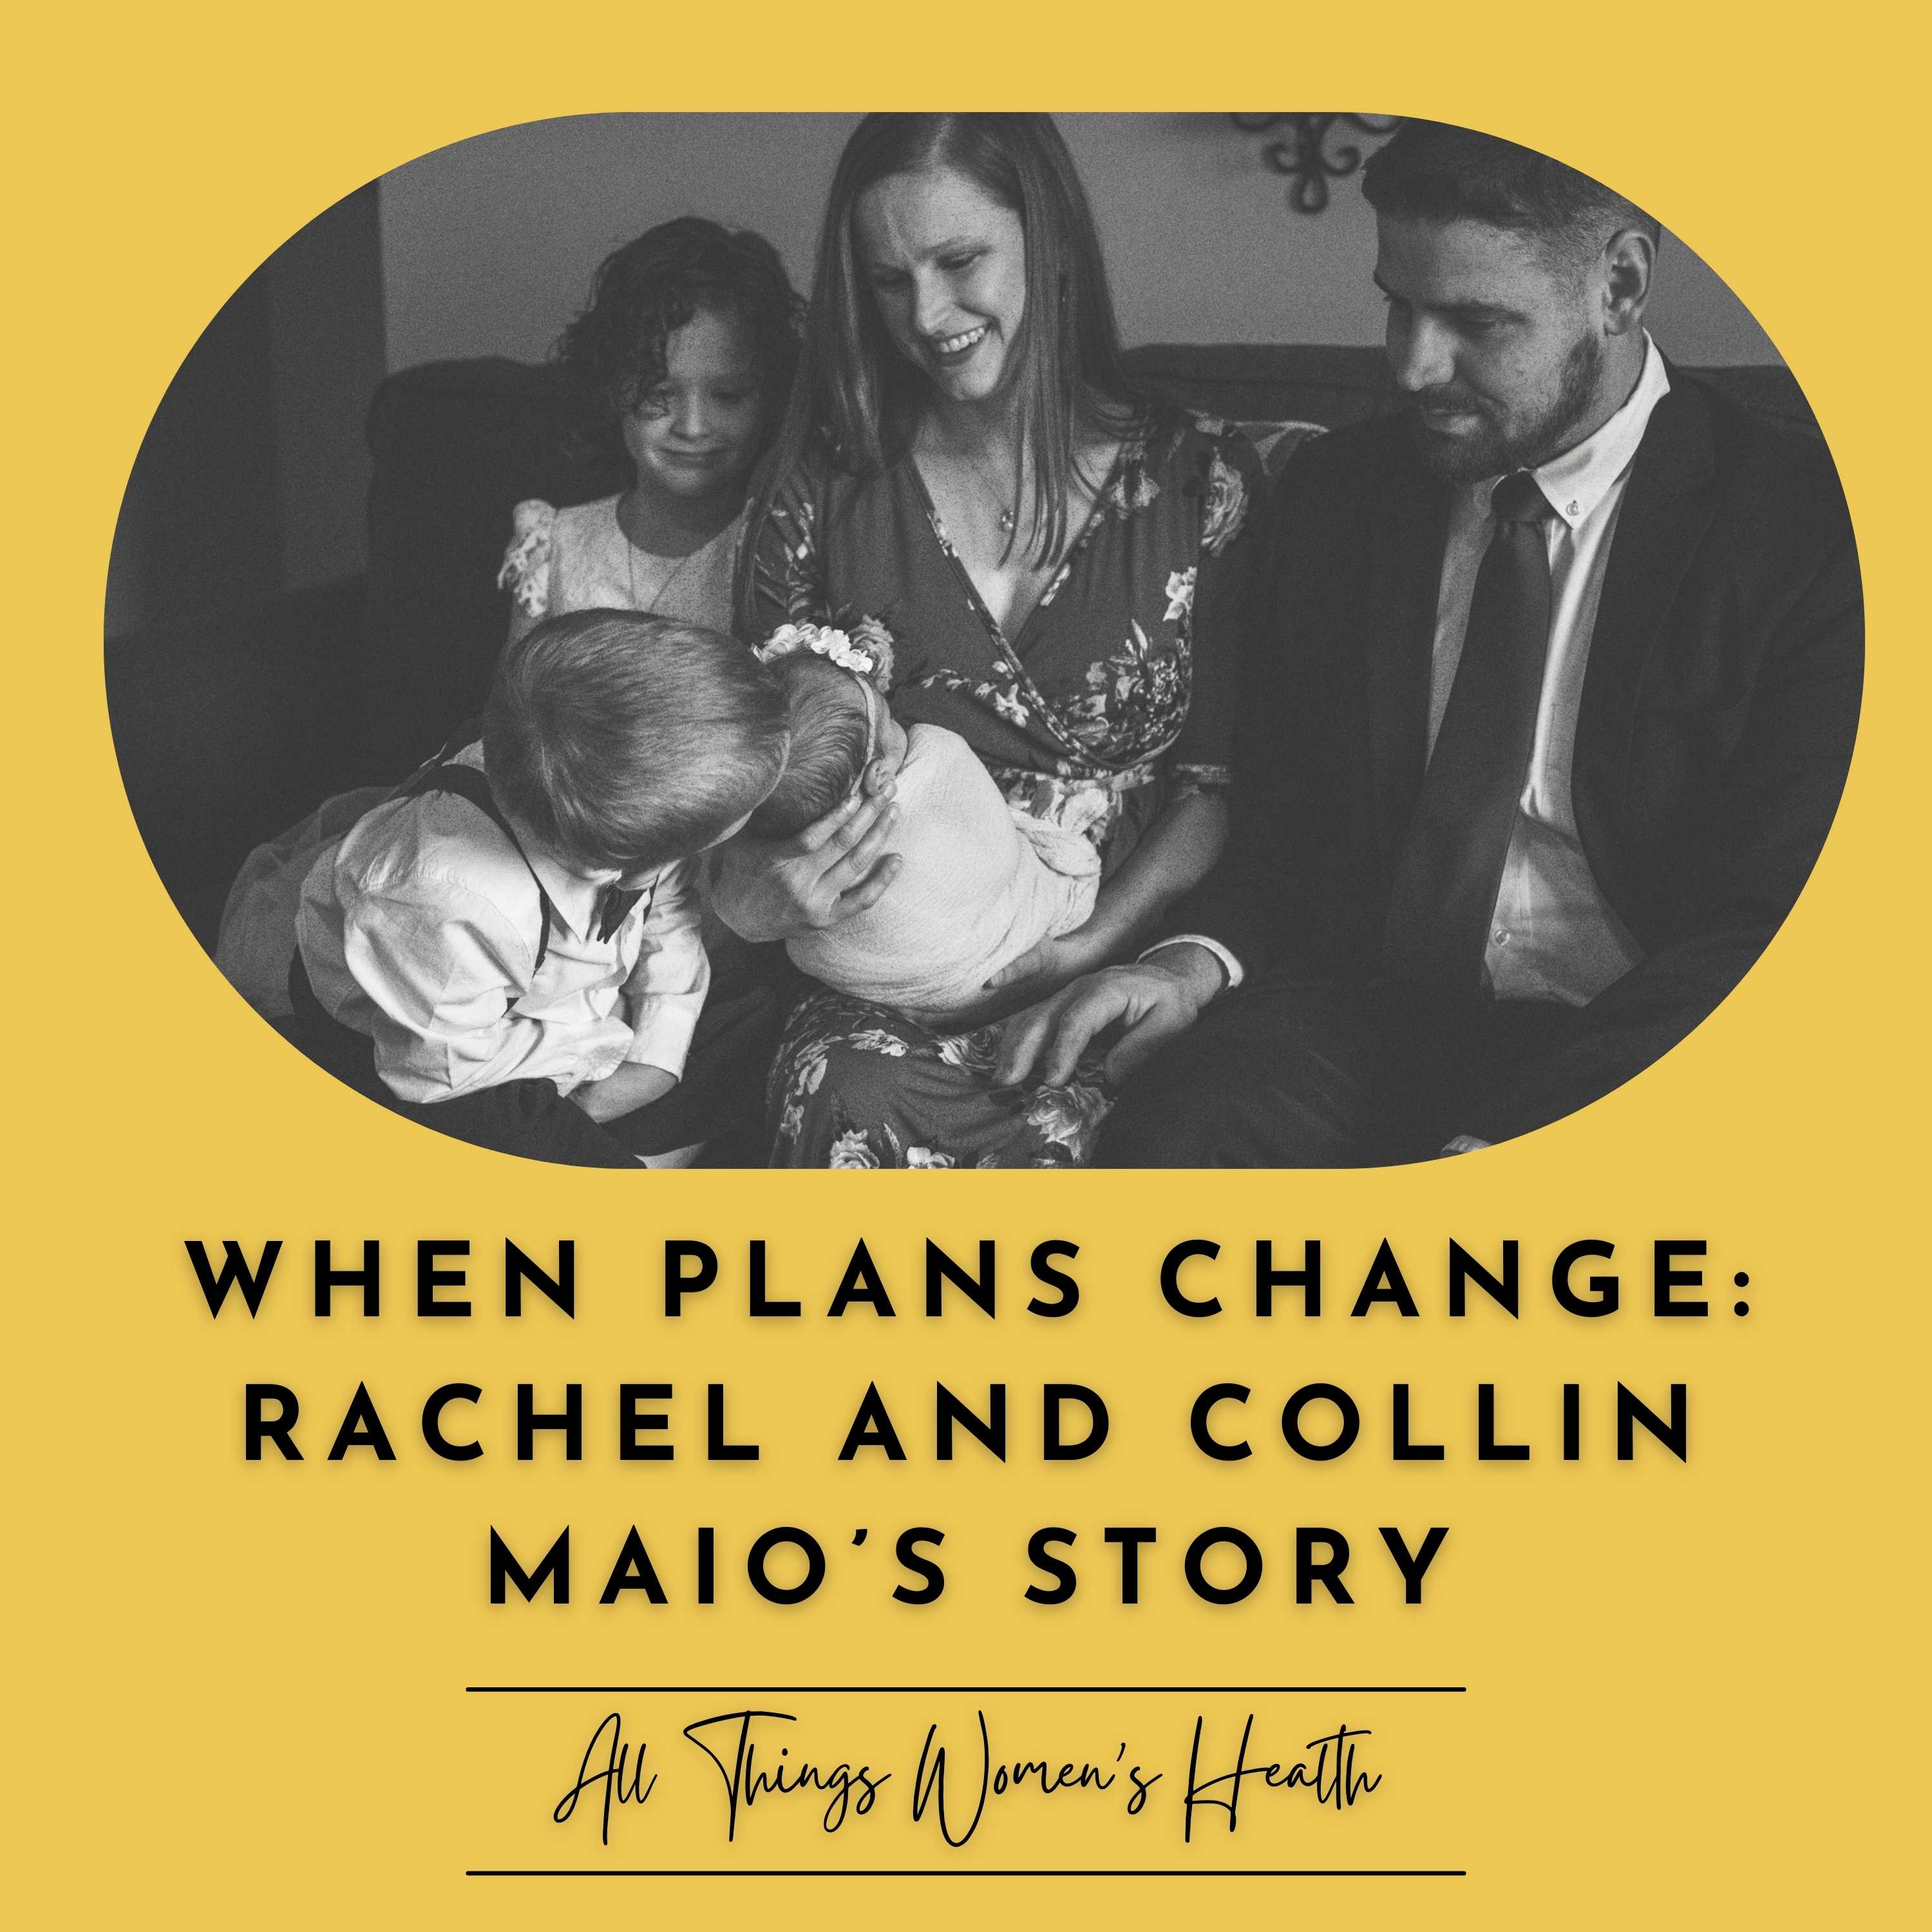 When Plans Change: Rachel and Collin Maio’s Story